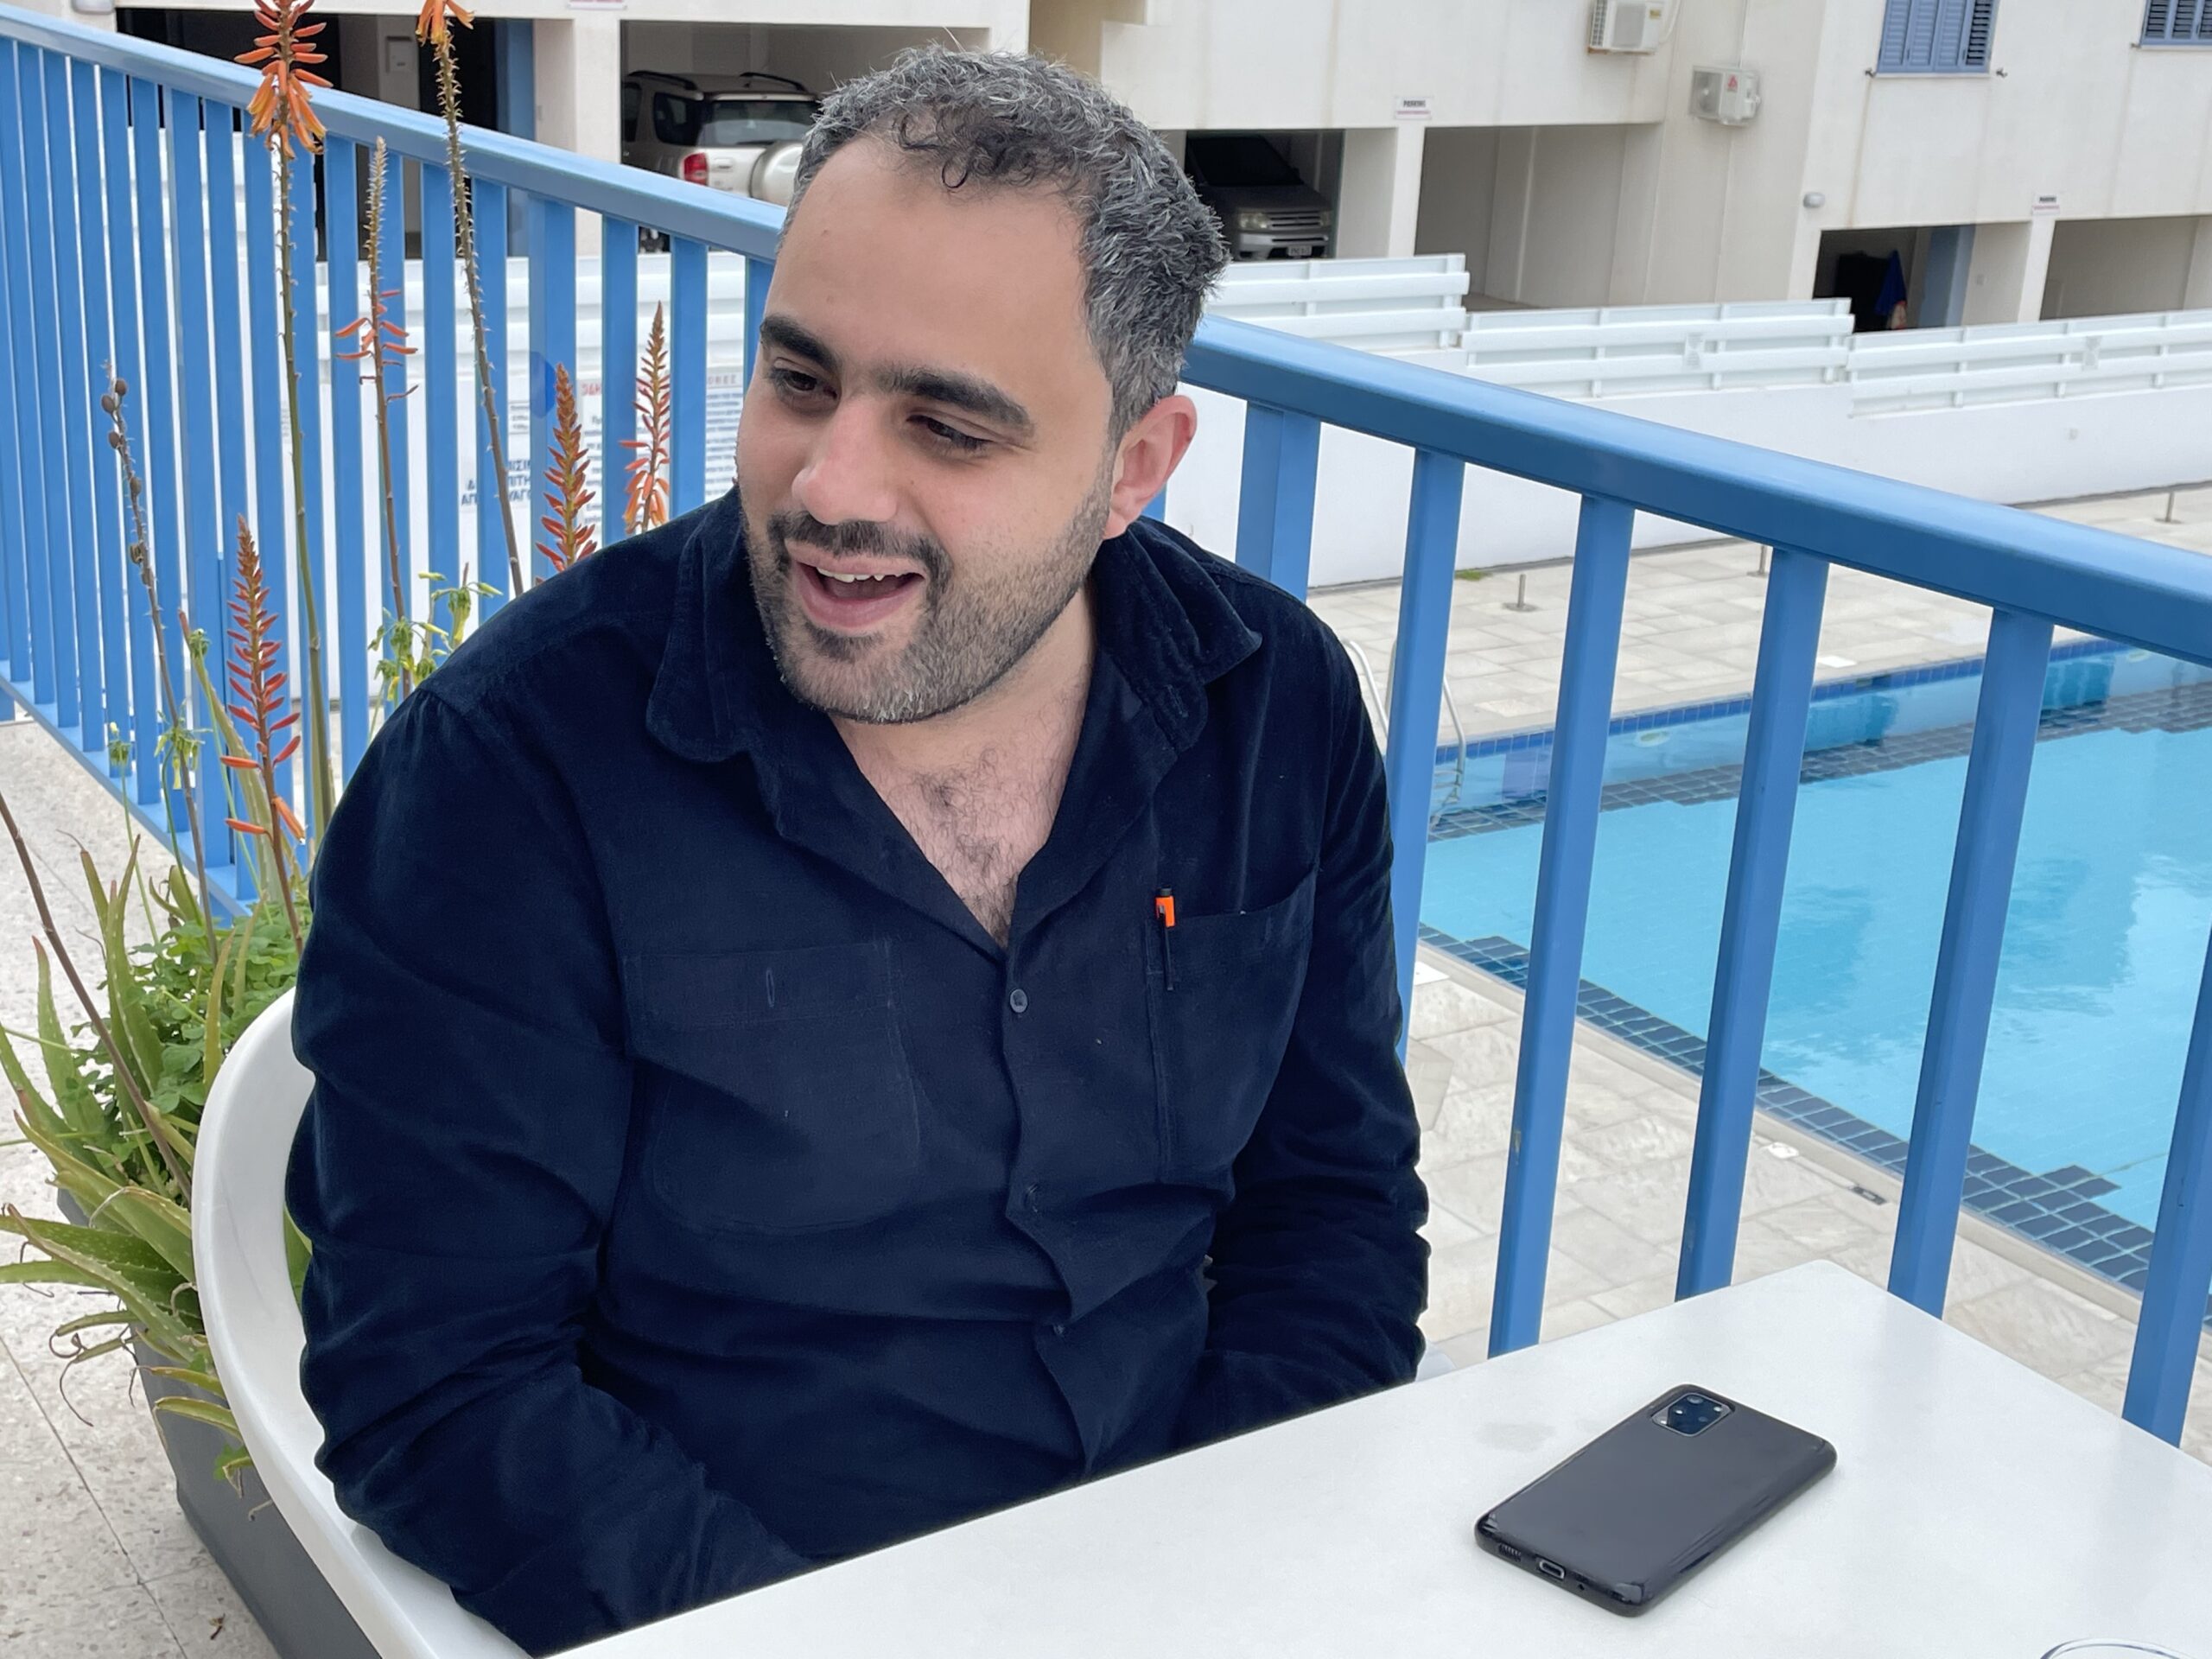 Nawar takes a break from a busy day to tell us about his family and the outreach work he is doing with the Syrian community in Pafos. © UNHCR Cyprus